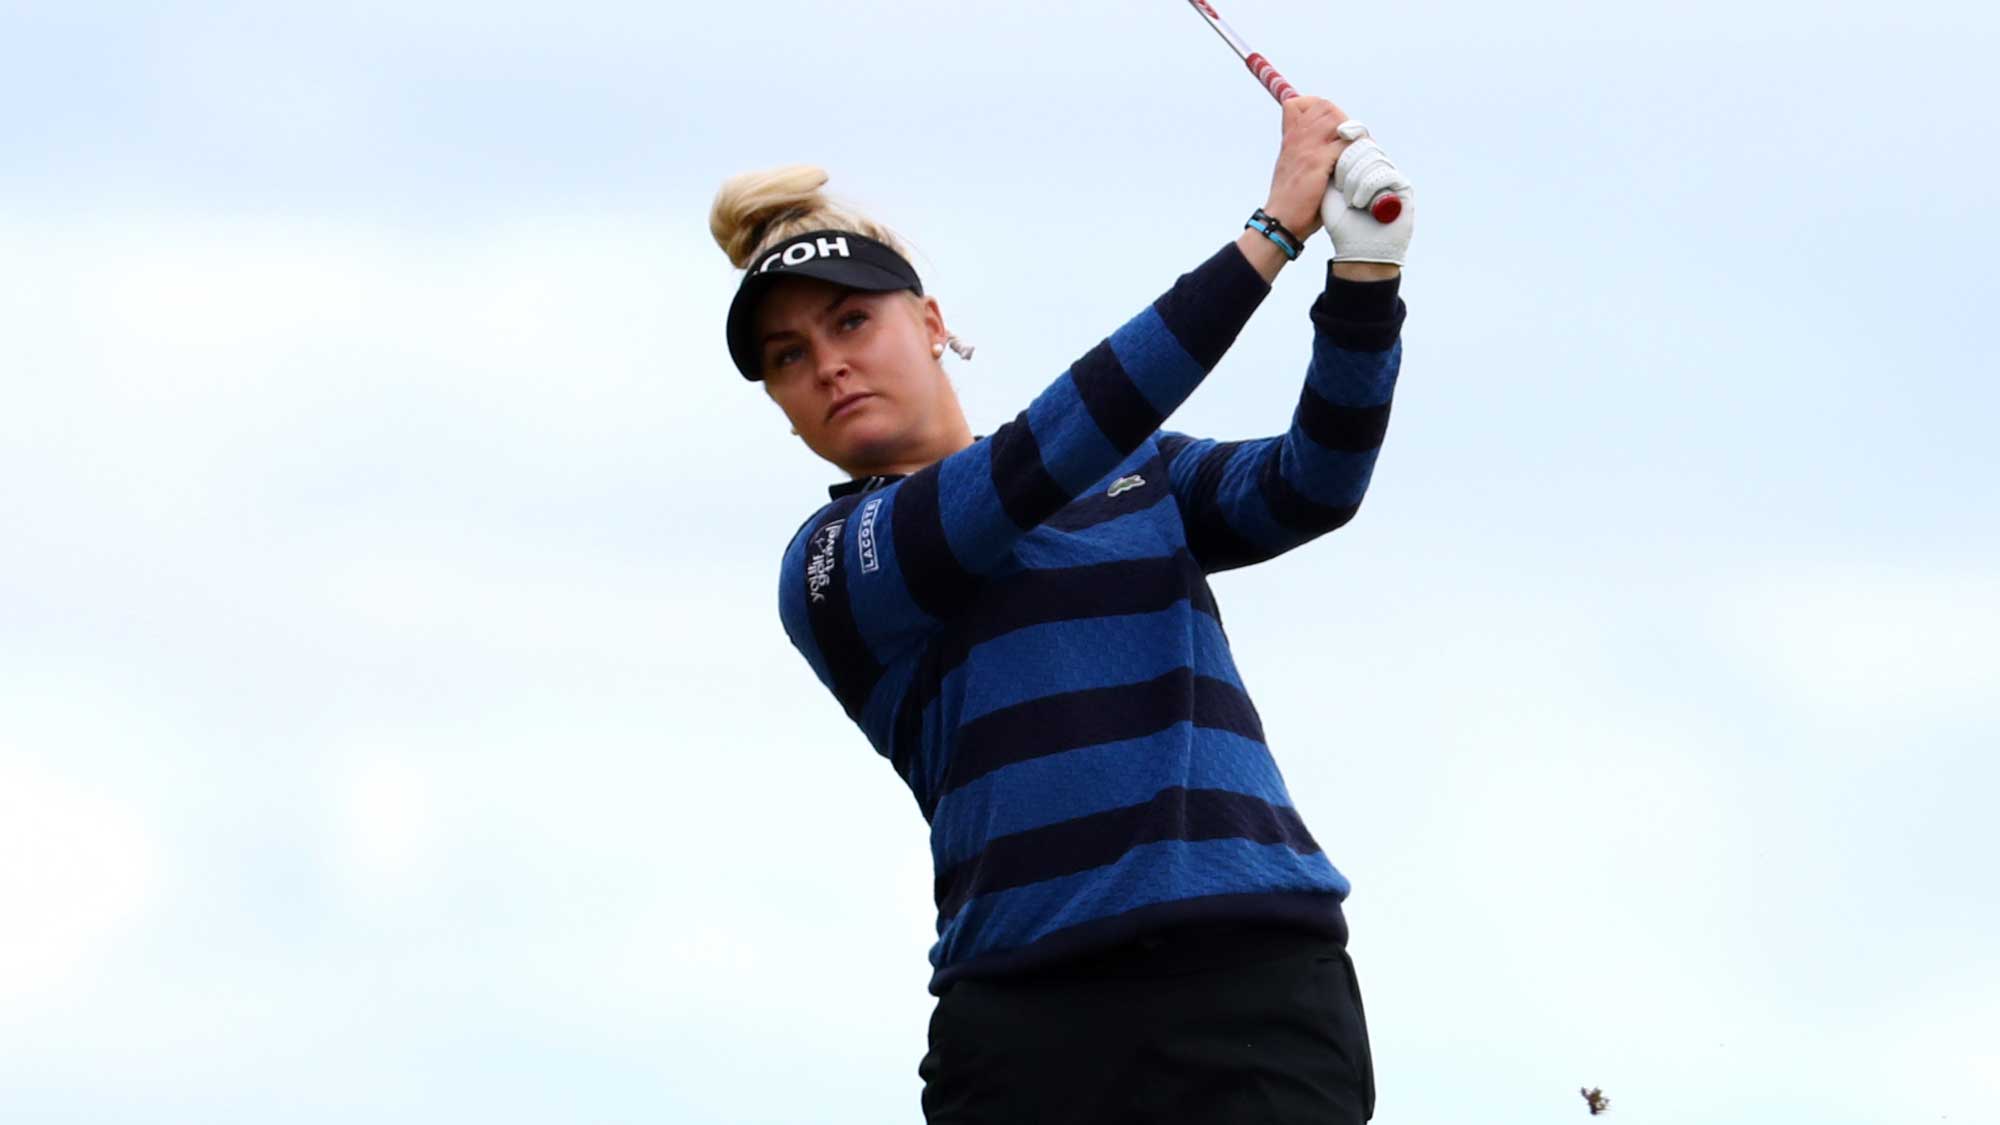 Charley Hull of England hits her second shot on the 4th hole during the second round of the Ricoh Women's British Open at Kingsbarns Golf Links